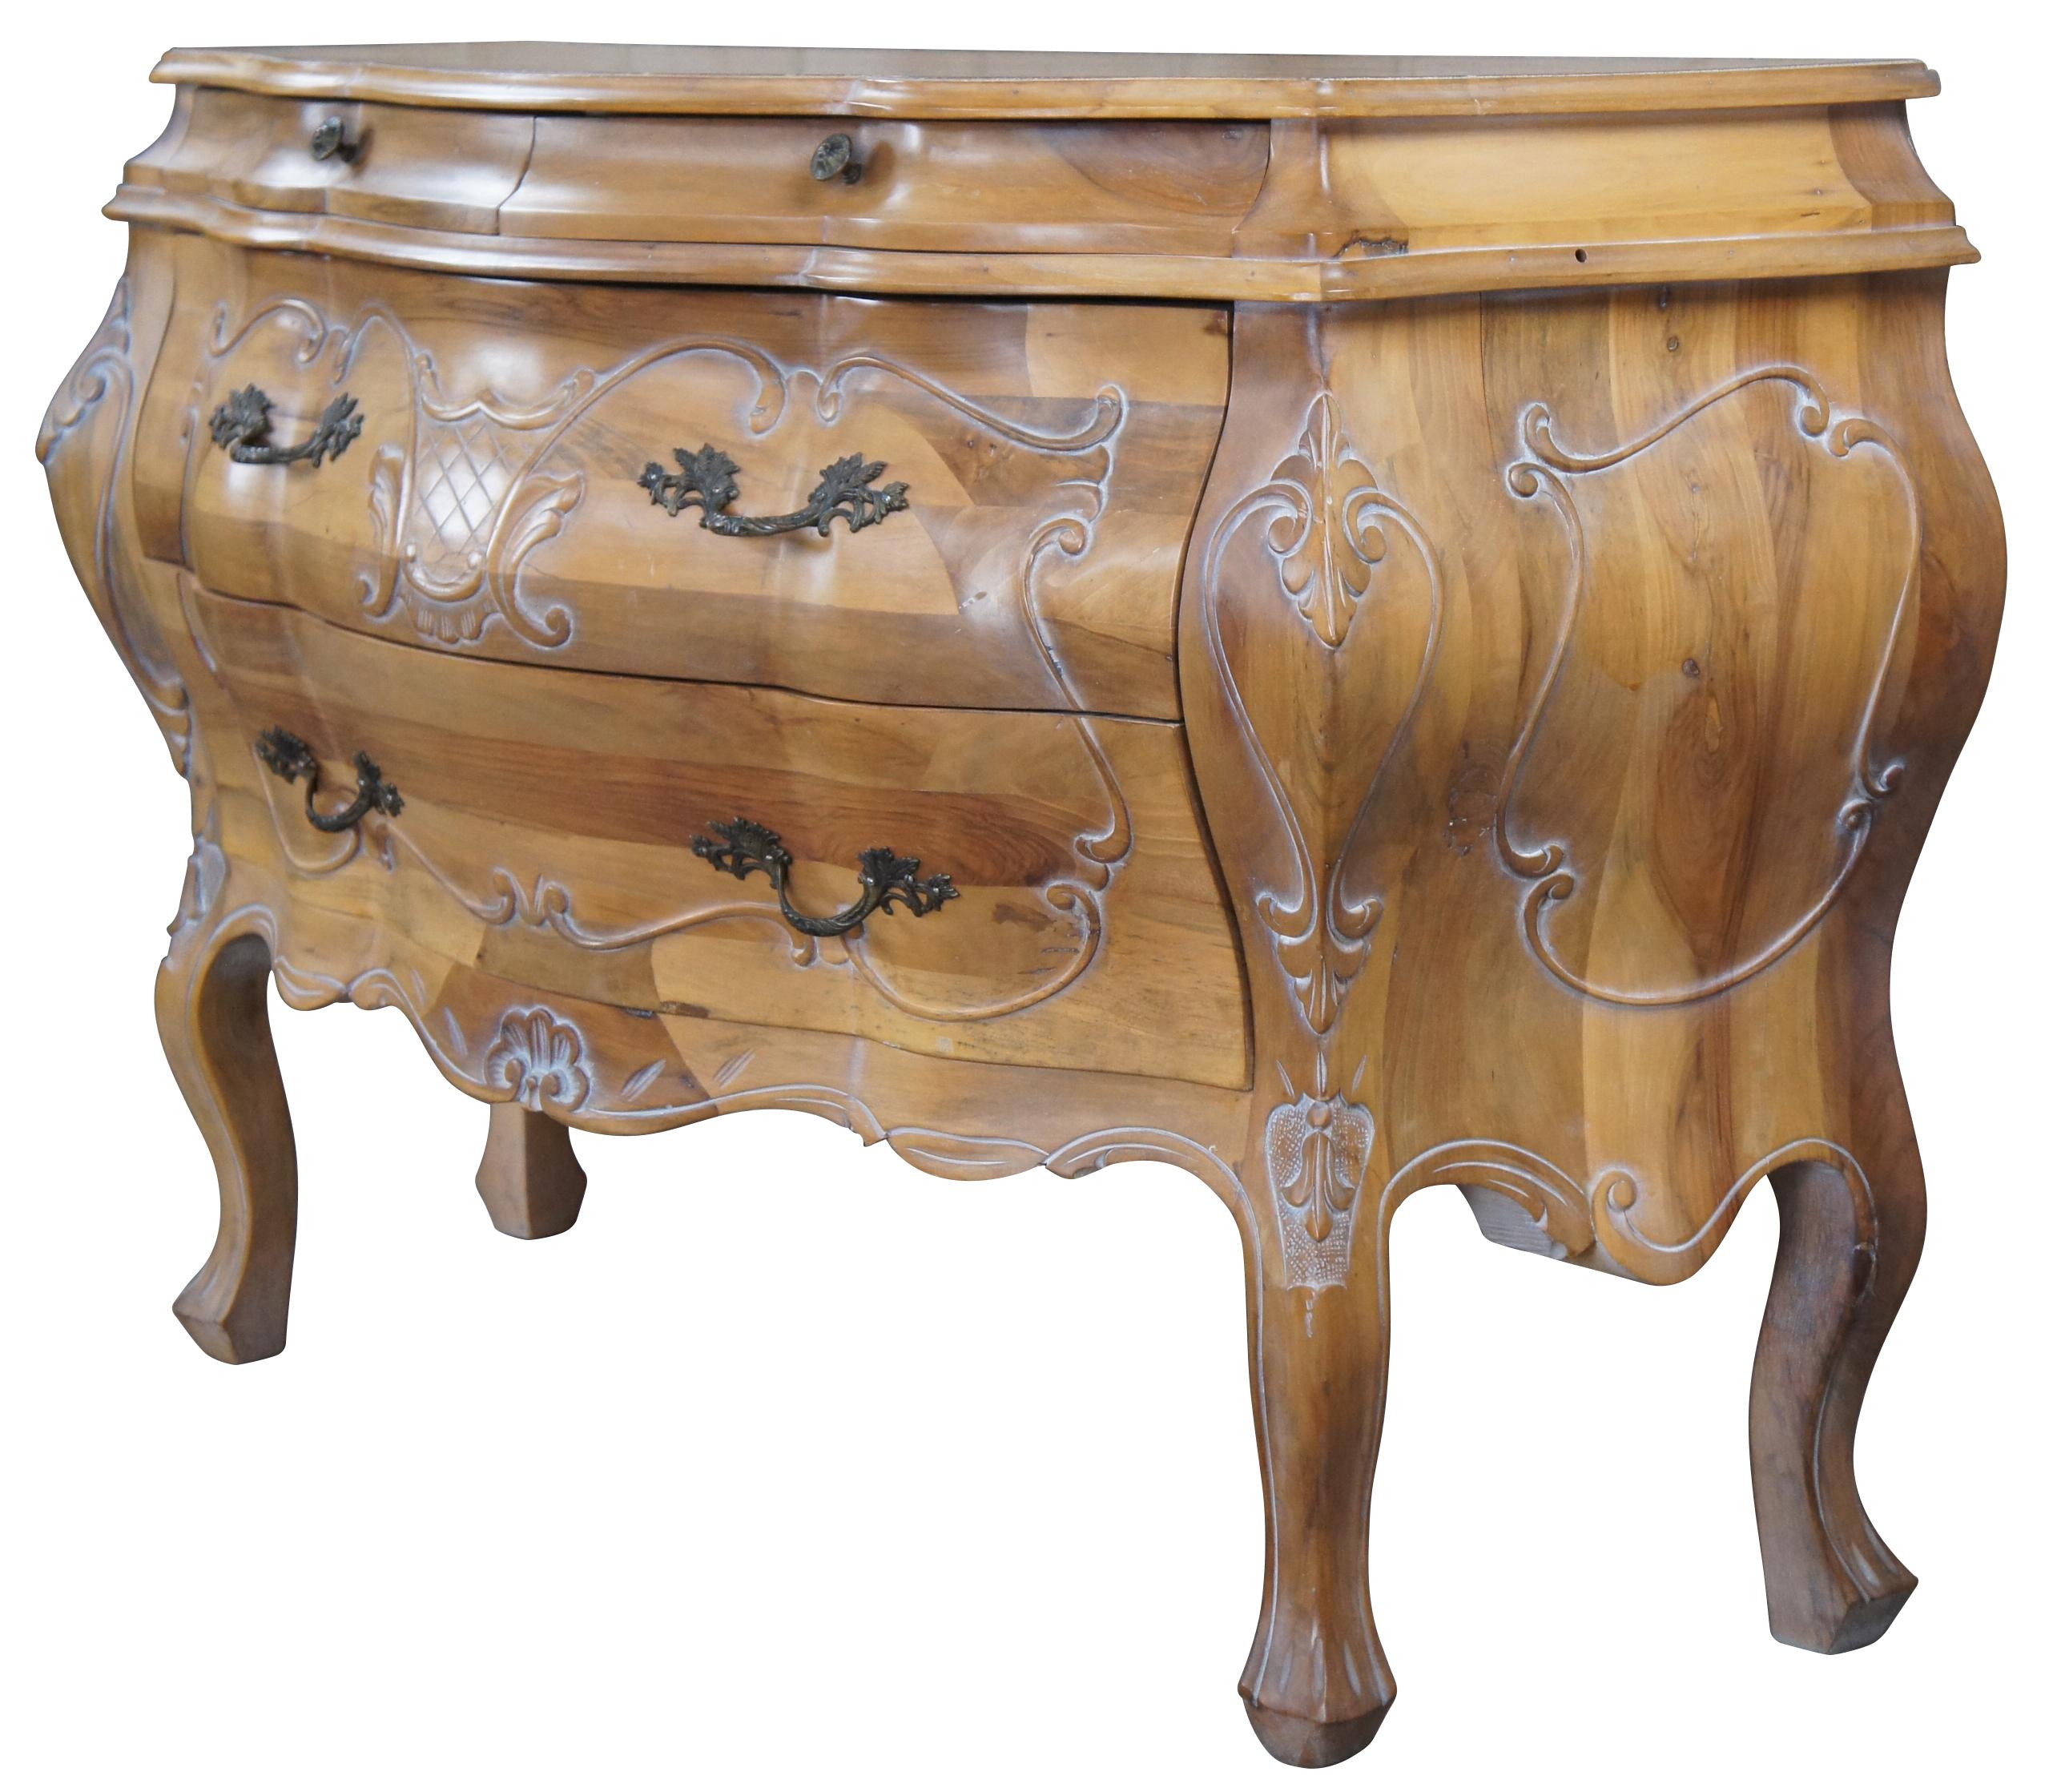 Vintage bombe chest or commode, circa last quarter 20th Century. Made of pine featuring ornate French and Italian styling with two petite glove drawers over two drawers supported by cabriole legs. Marked Italy along backside. Measure: 51